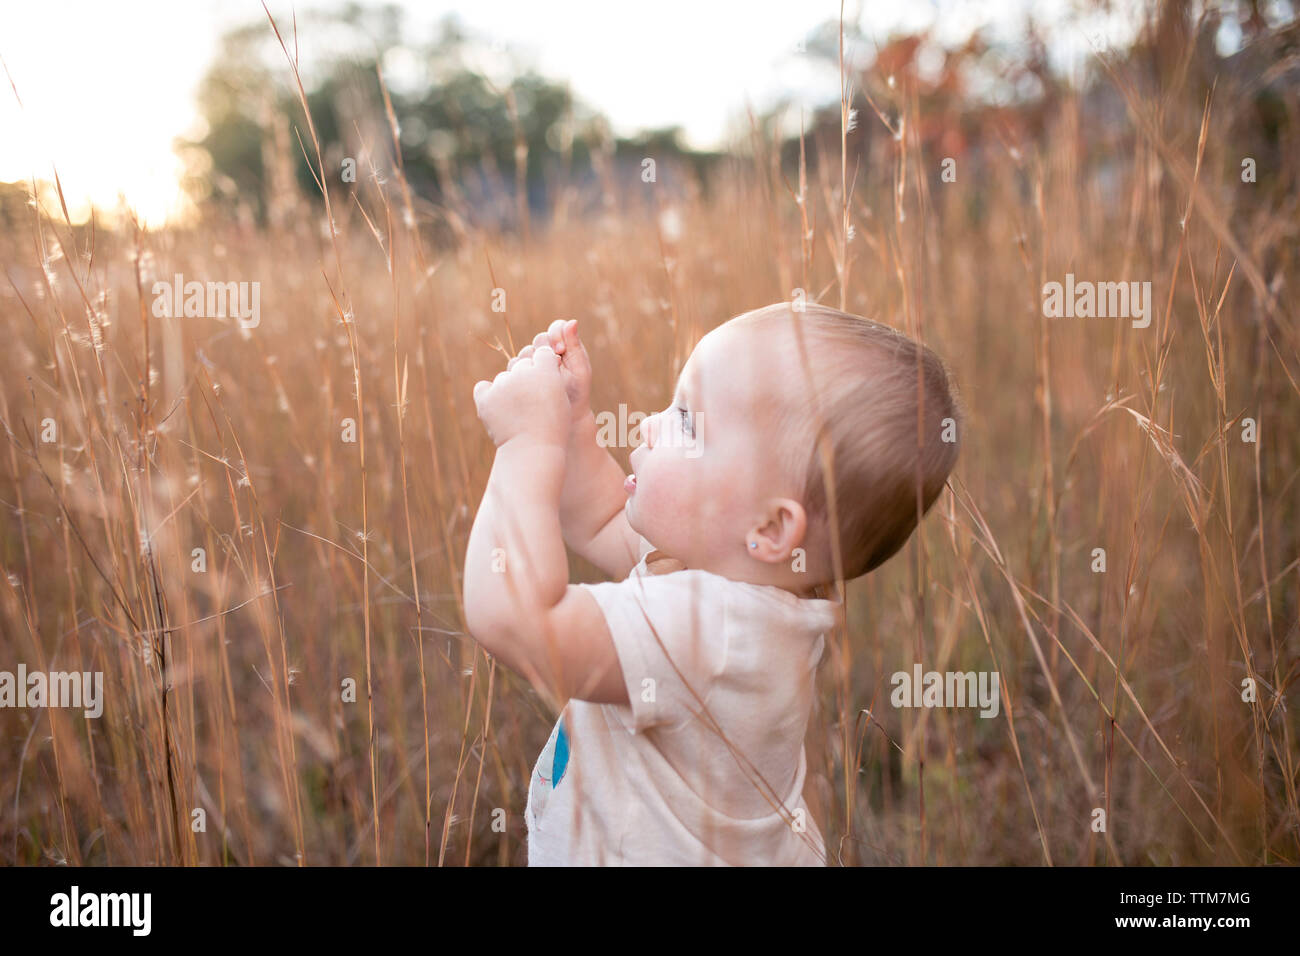 Side view of baby girl standing amidst dry plants Stock Photo